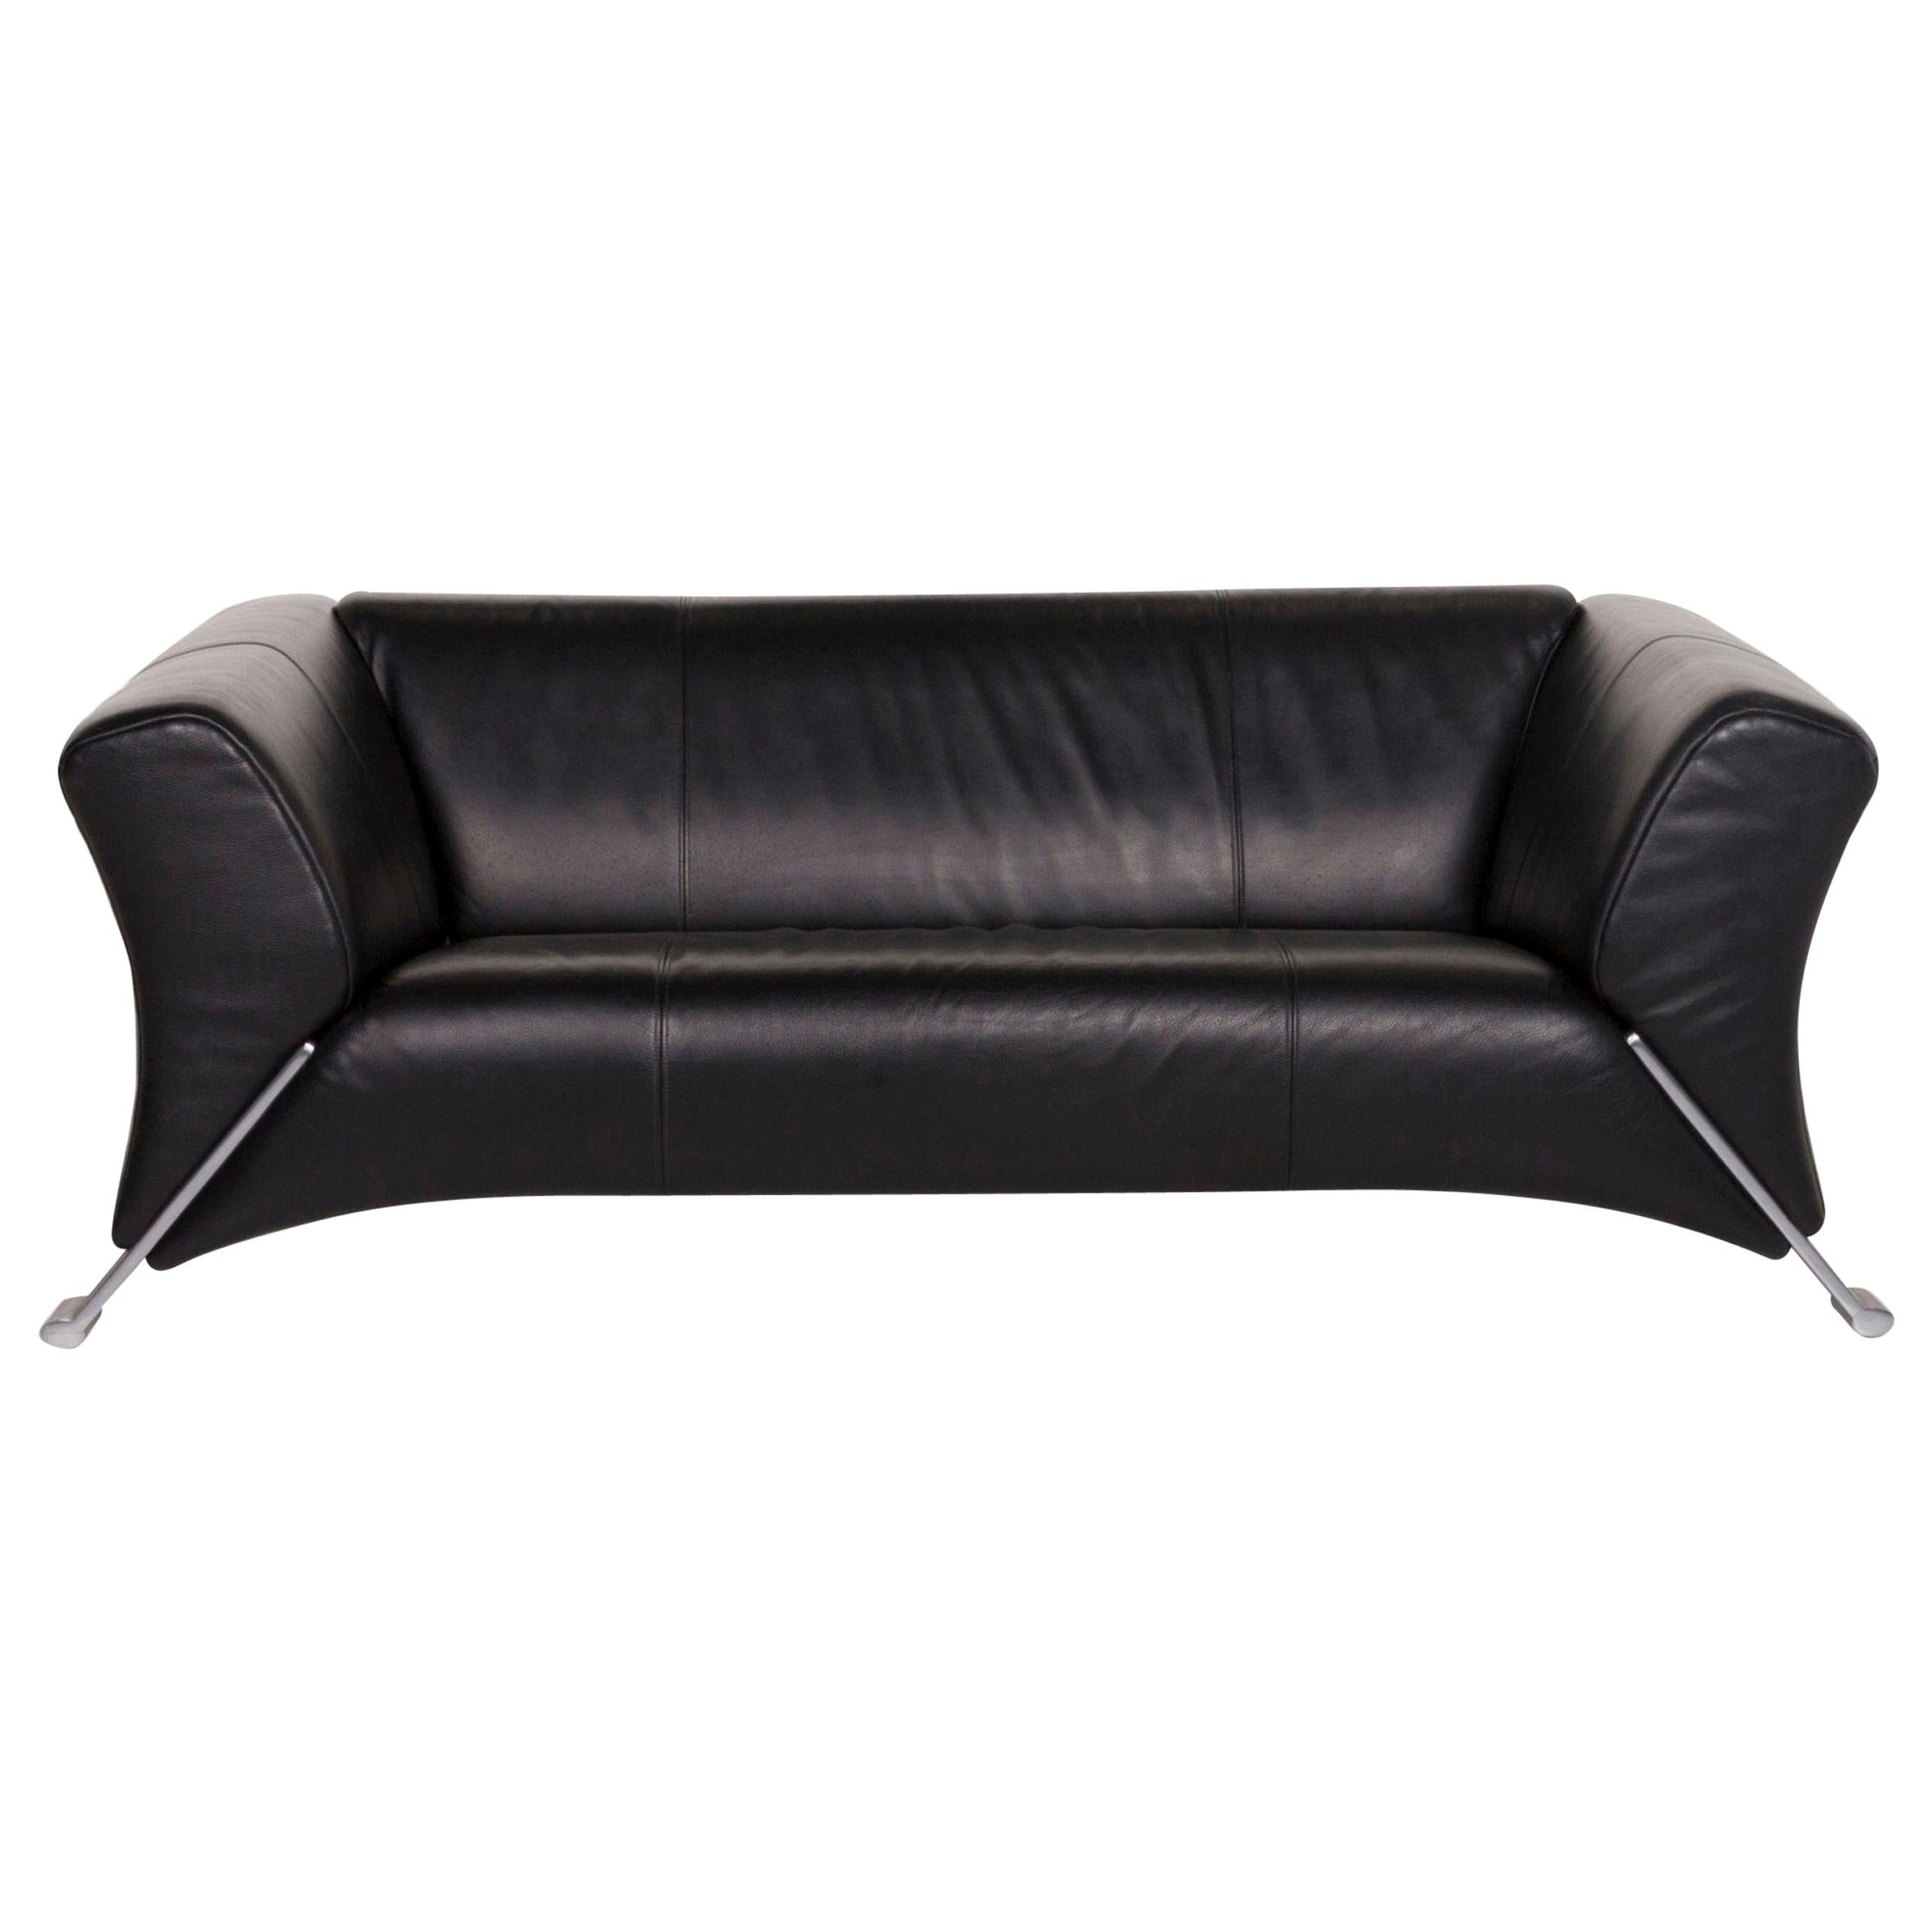 Rolf Benz 322 Leather Sofa Black Two-Seat For Sale